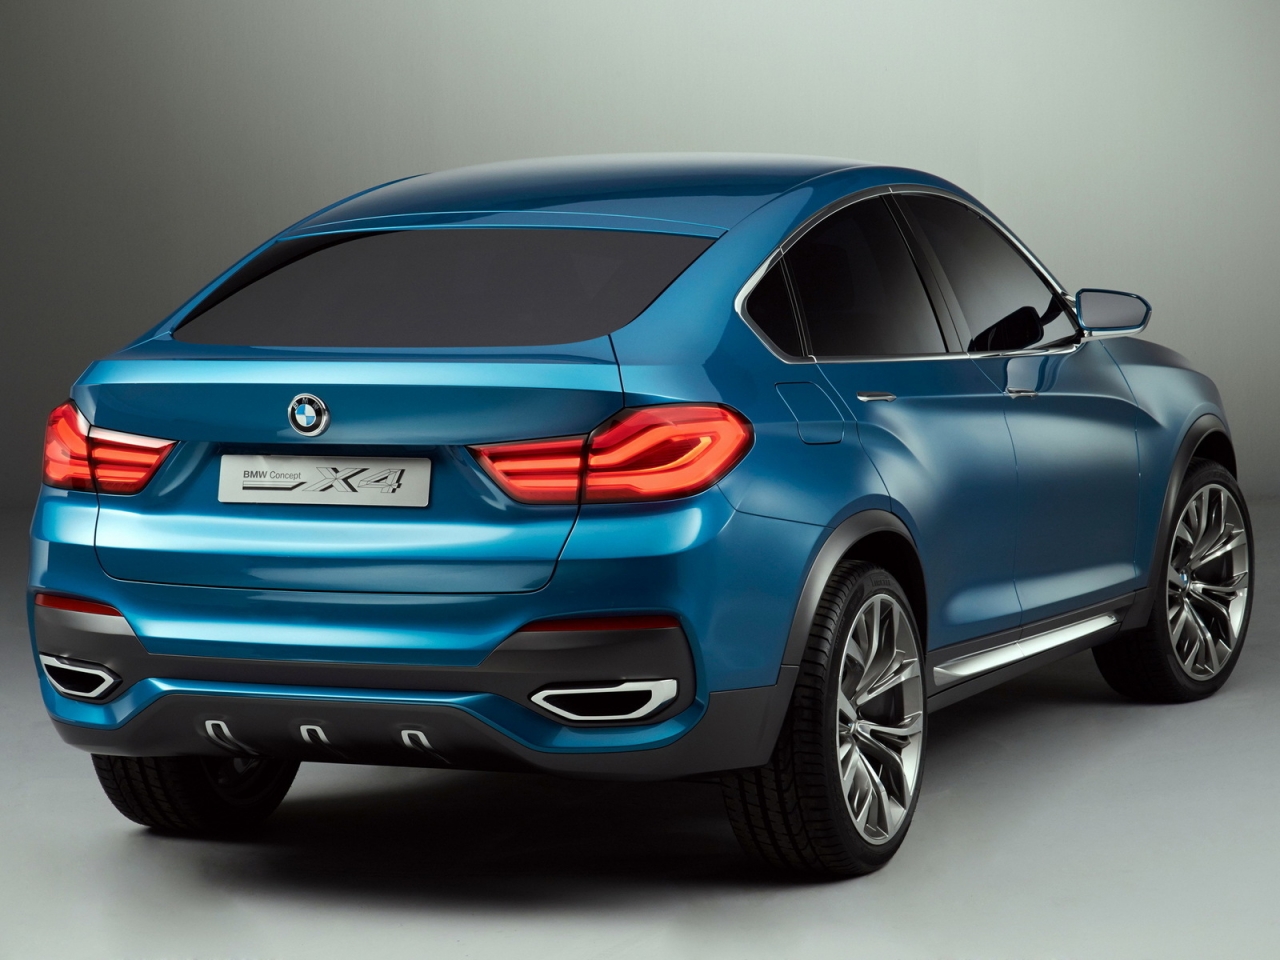 BMW X4 Back View for 1280 x 960 resolution